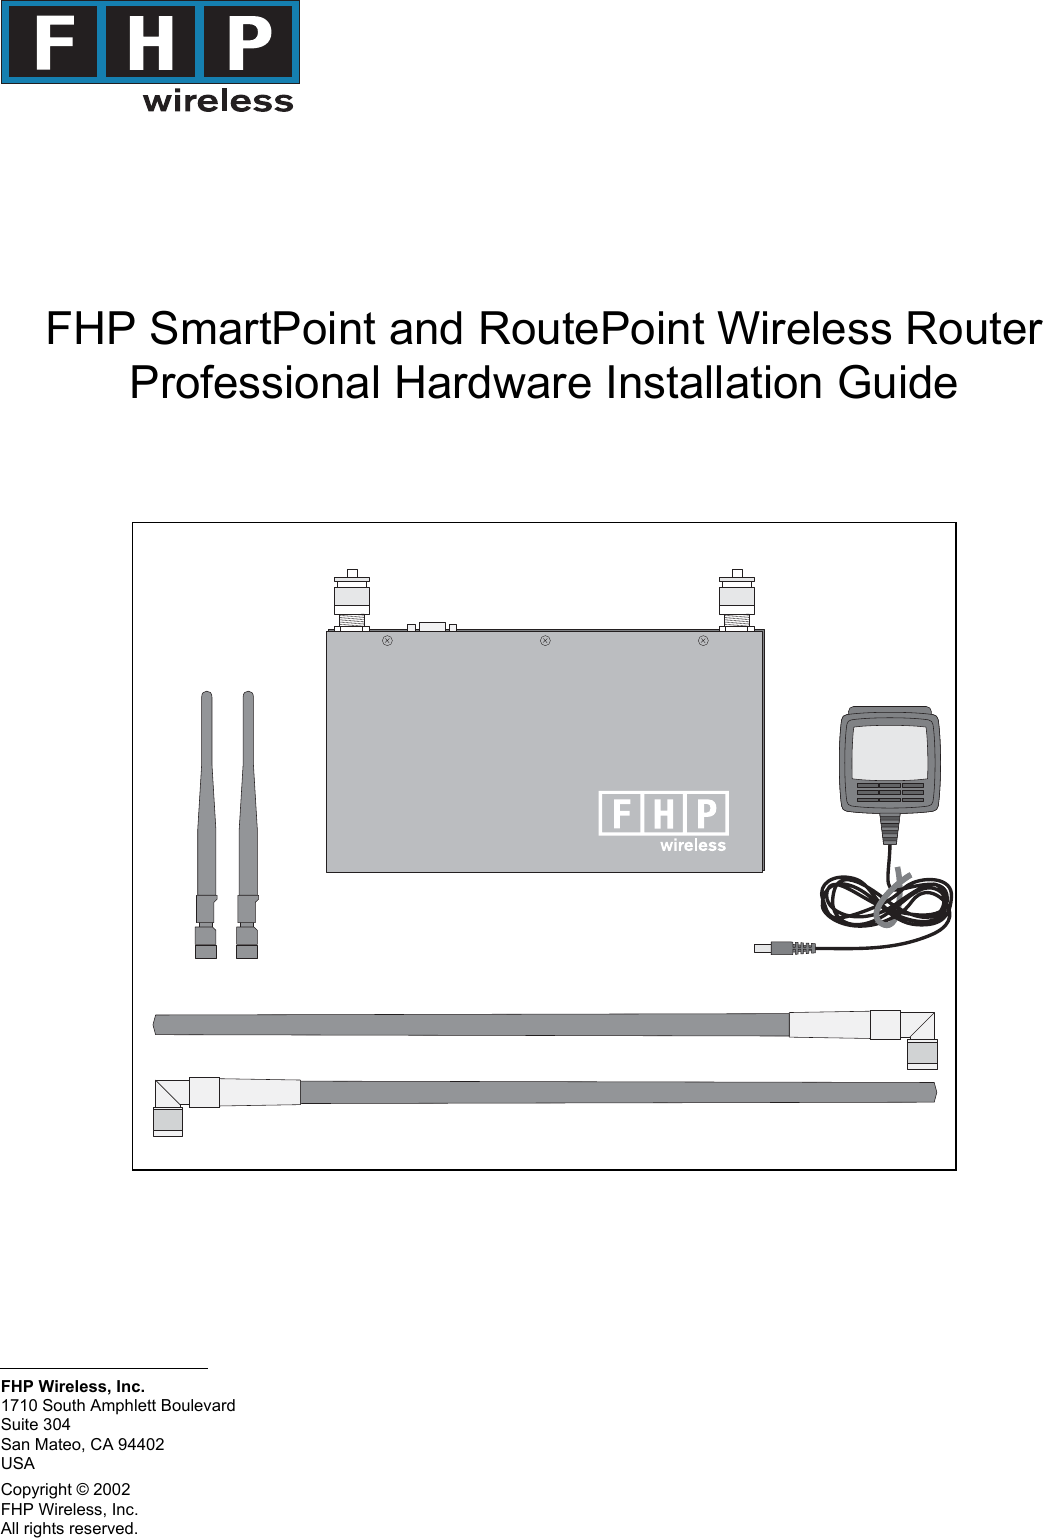 FHP Wireless, Inc.All rights reserved.Suite 304San Mateo, CA 94402USA1710 South Amphlett BoulevardFHP Wireless, Inc.Copyright © 2002FHP SmartPoint and RoutePoint Wireless RouterProfessional Hardware Installation Guide